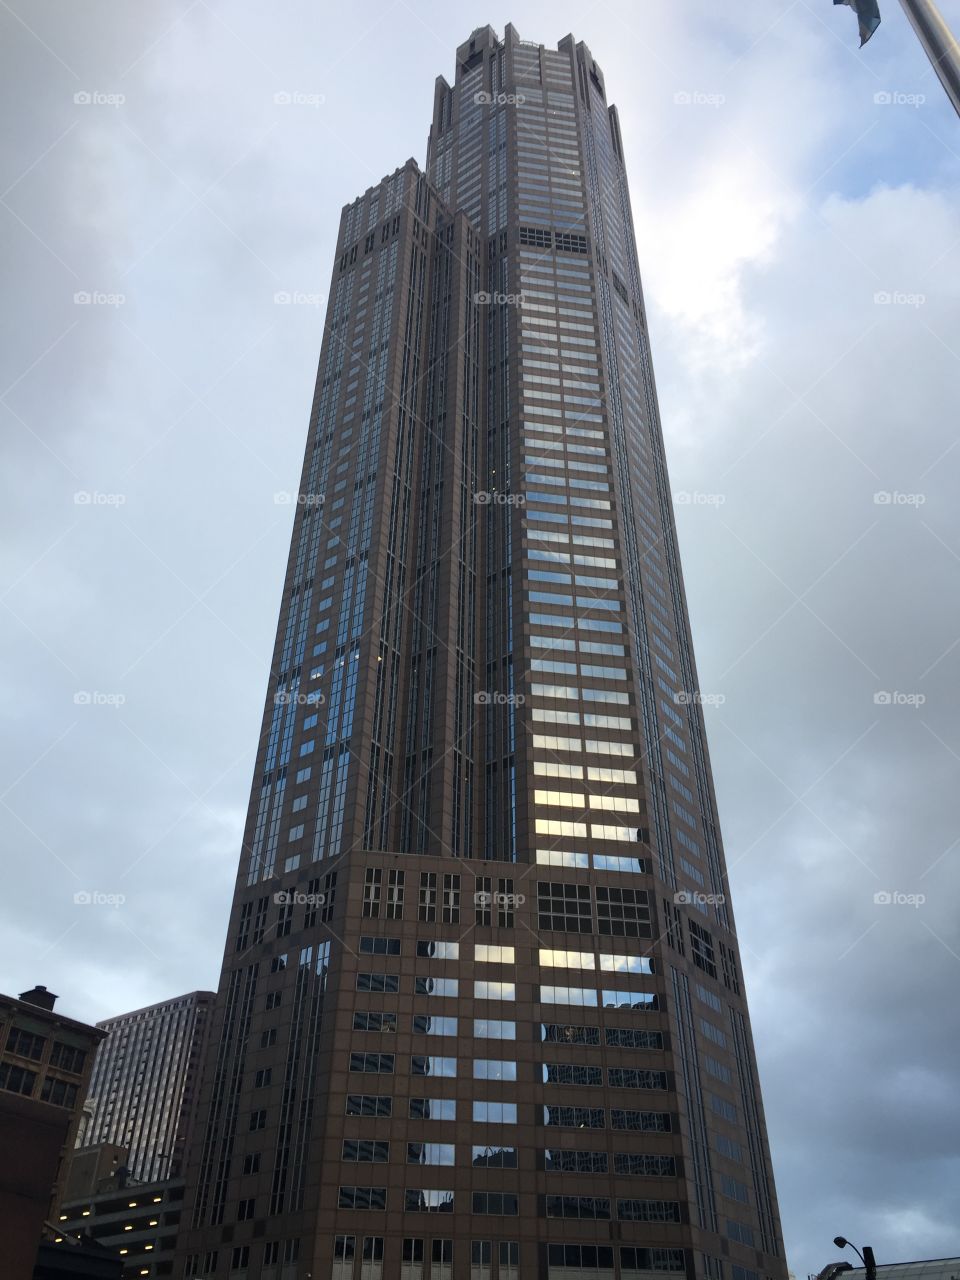 Tall Building on a Cloudy Day